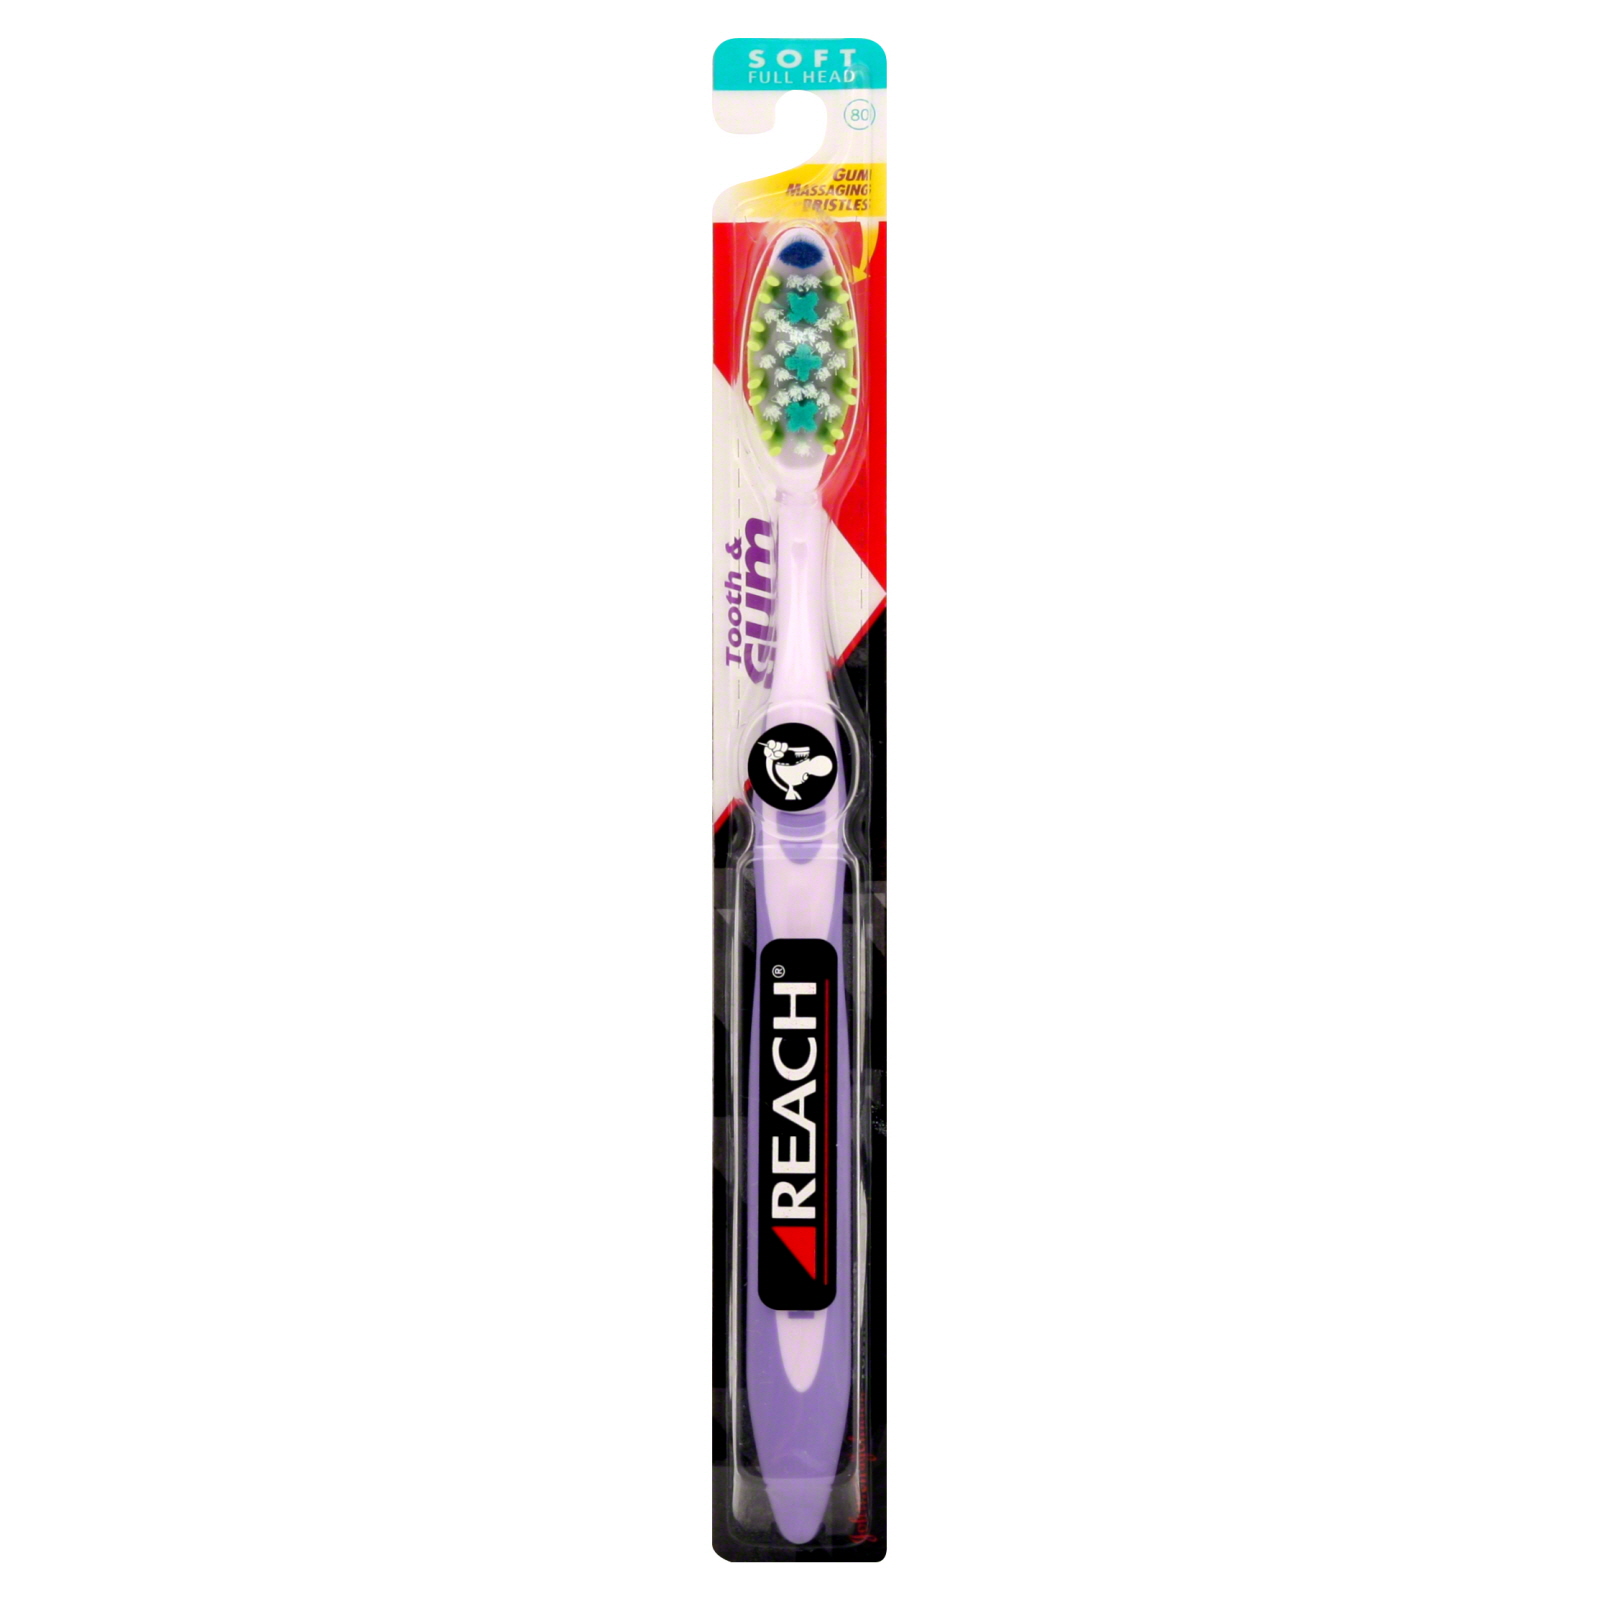 Reach Max Soft Electric Toothbrush